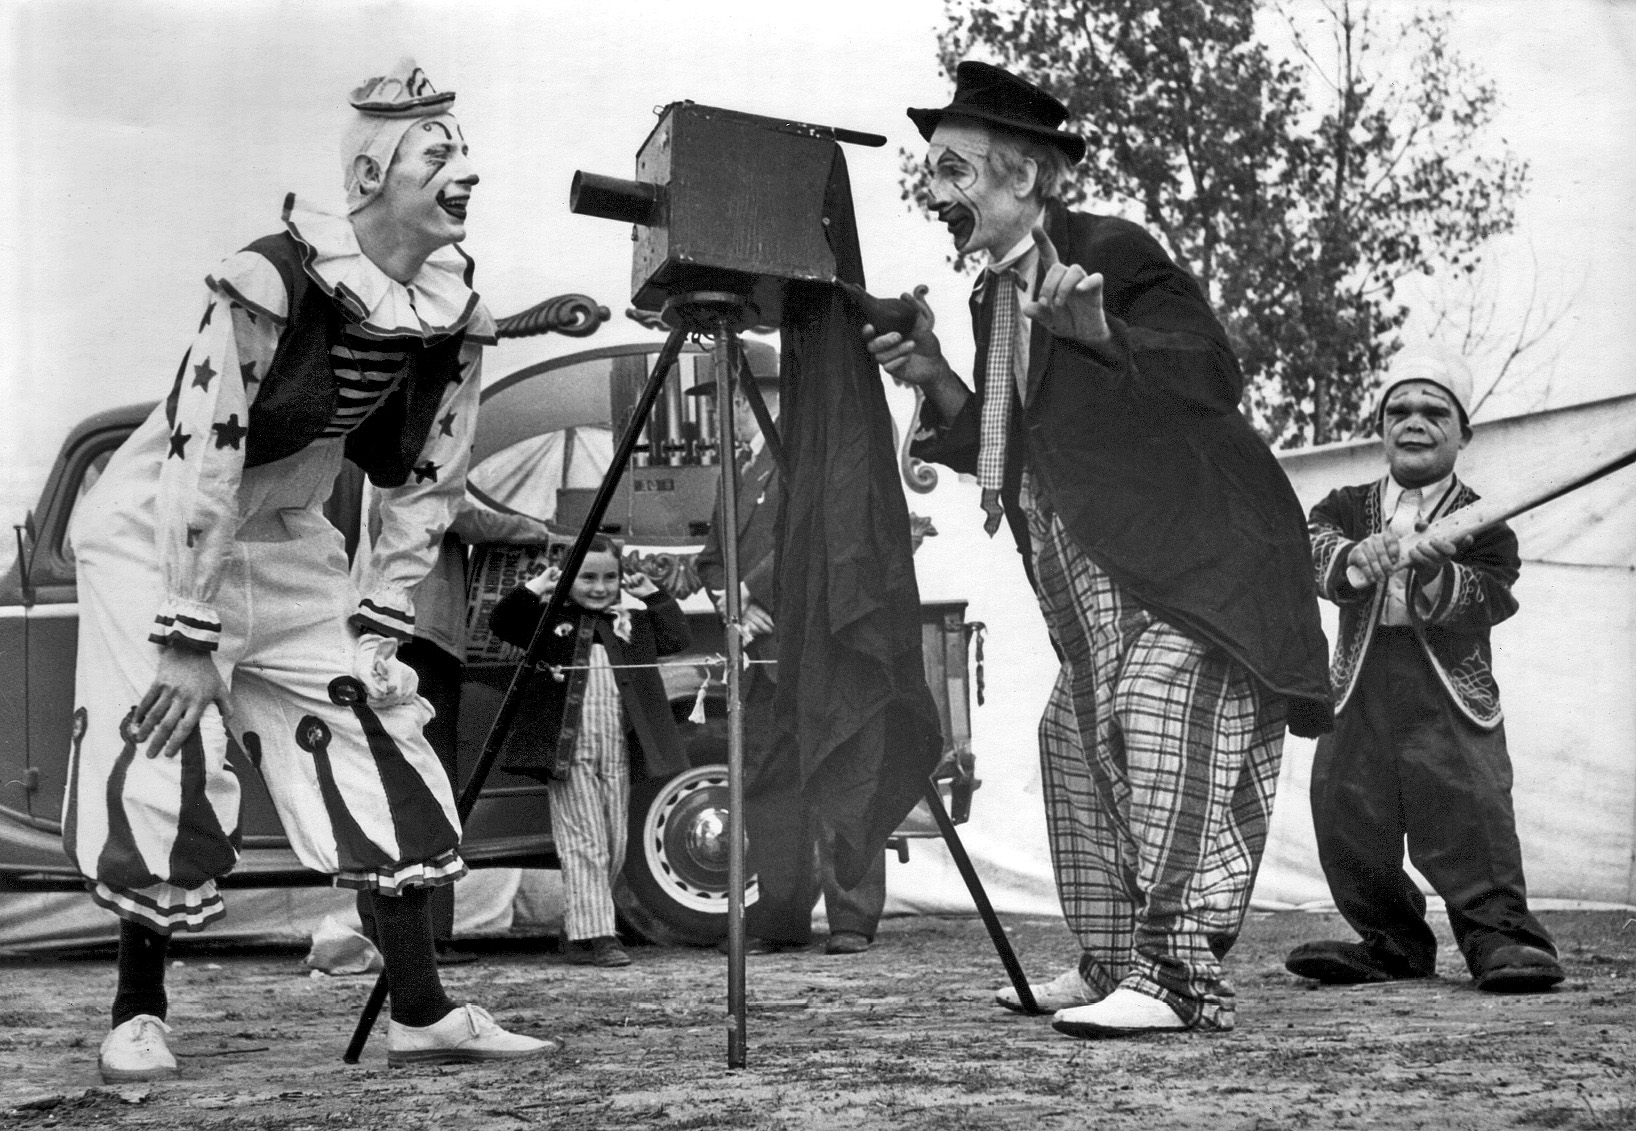 1947 or 48. Webster Brothers Circus clowns. Middle clown is Happy Holmes, my wife is in the back, holding her ears. View full size.